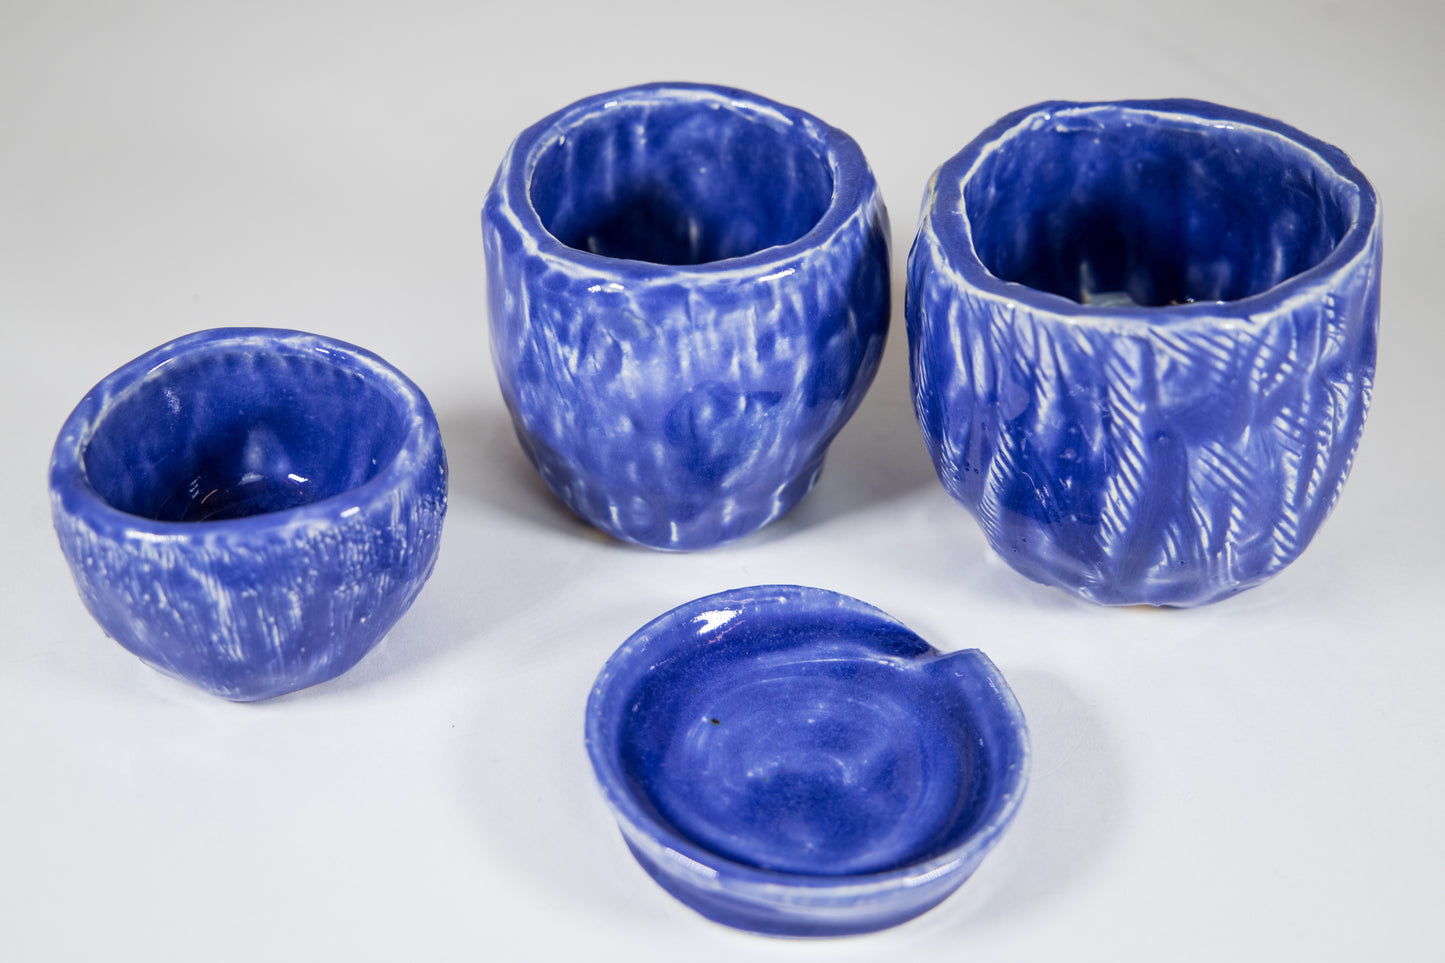 Blue Stacking Bowls with Small Saucer